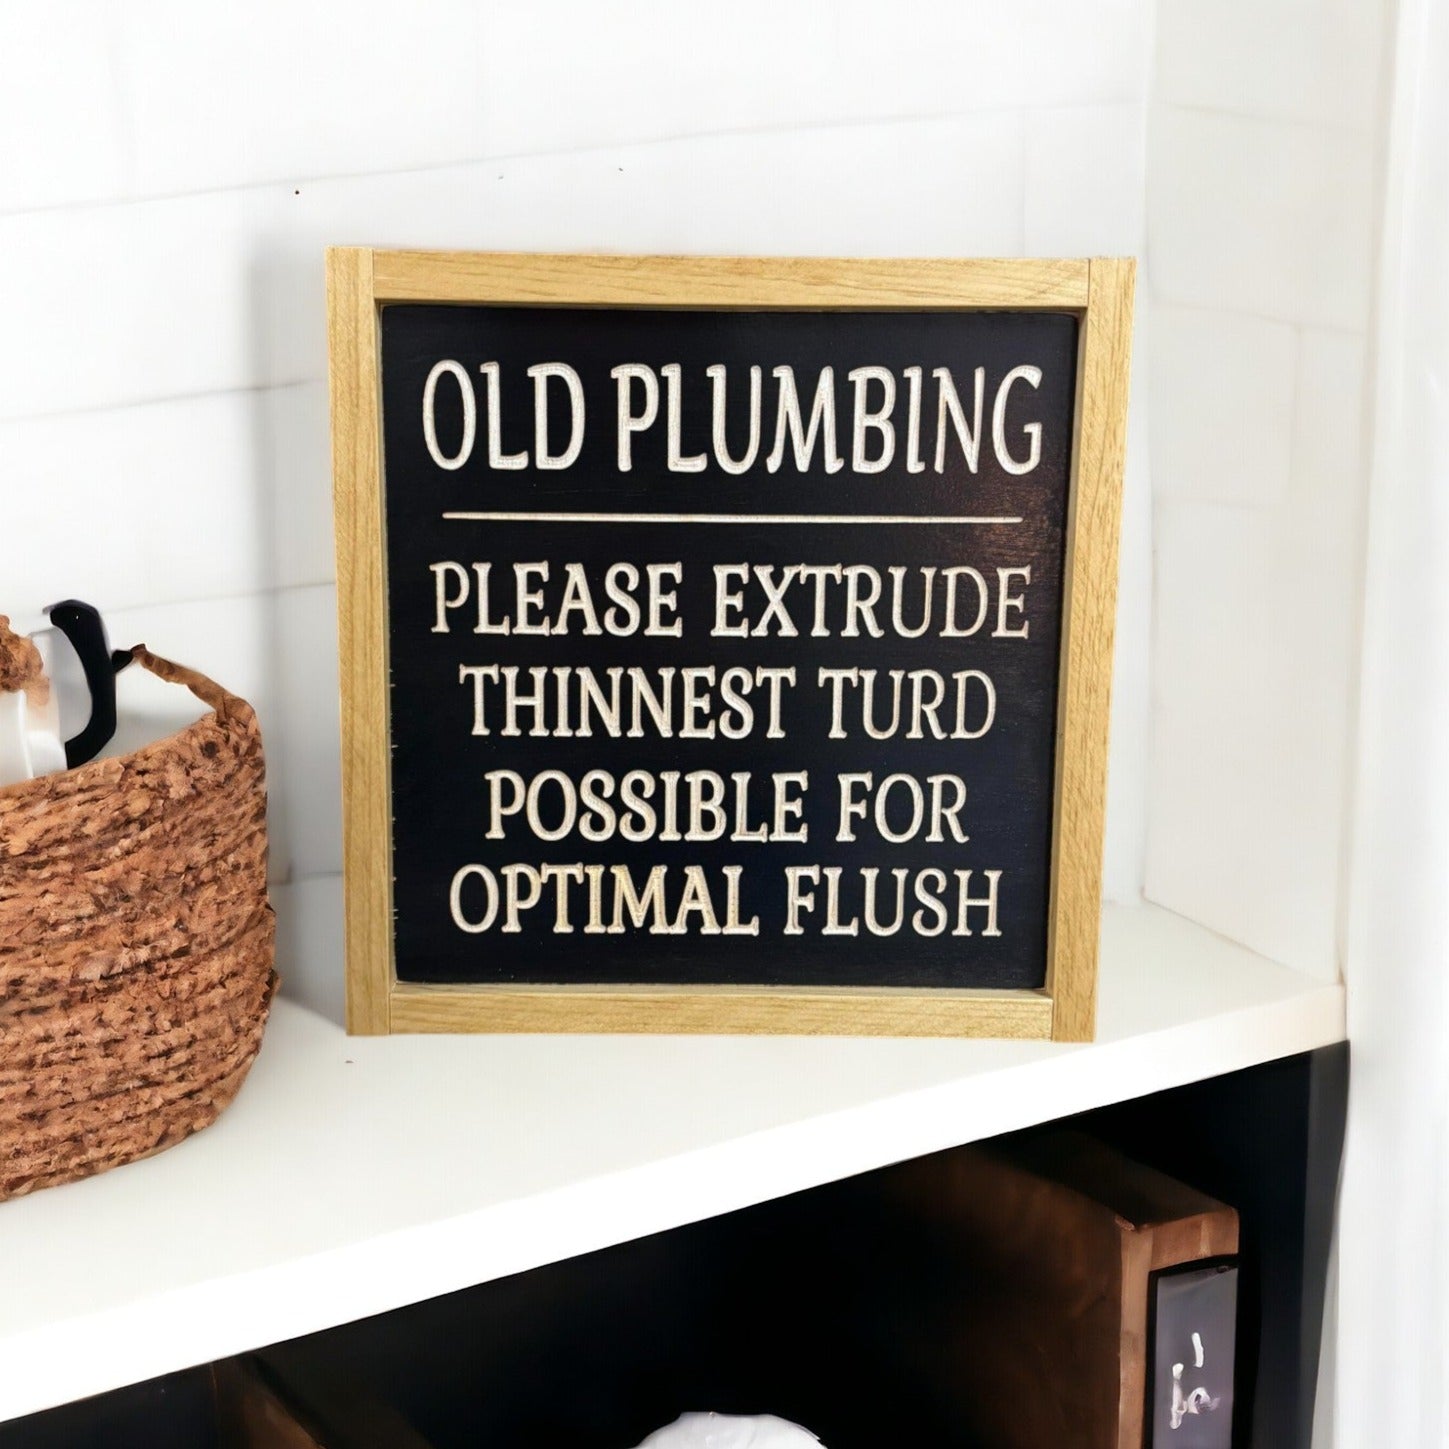 Carved wooden sign for farmhouse bathroom decor, featuring humorous 'Old Pumping: Please Extract Thinnest Turd Possible For Optimal Flush' joke, natural wood on black.